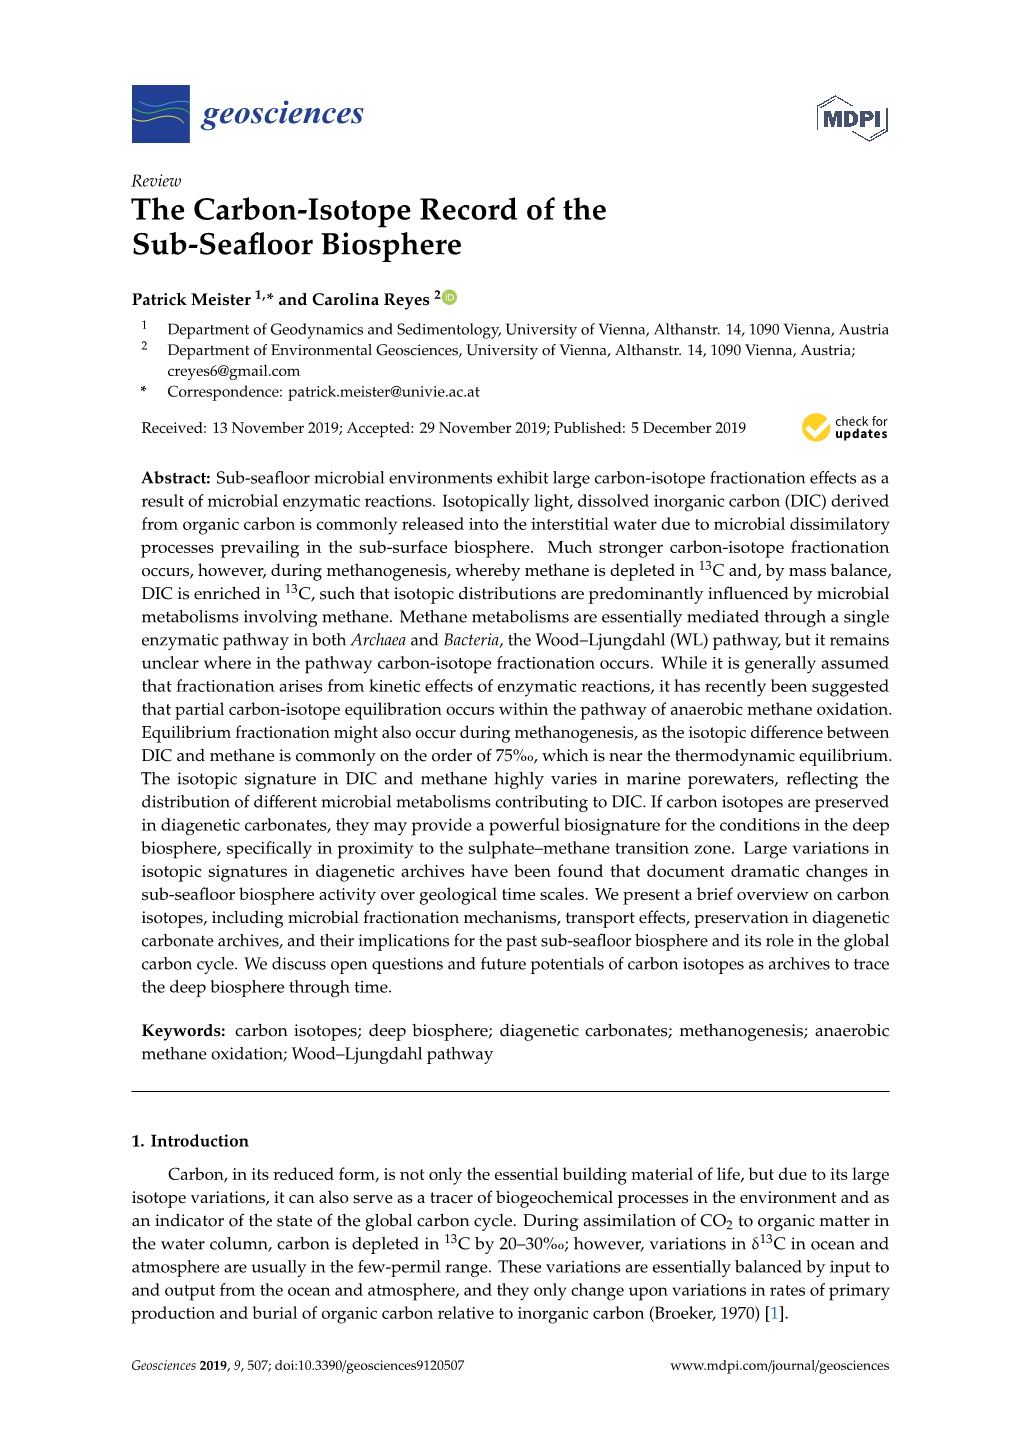 The Carbon-Isotope Record of the Sub-Seafloor Biosphere